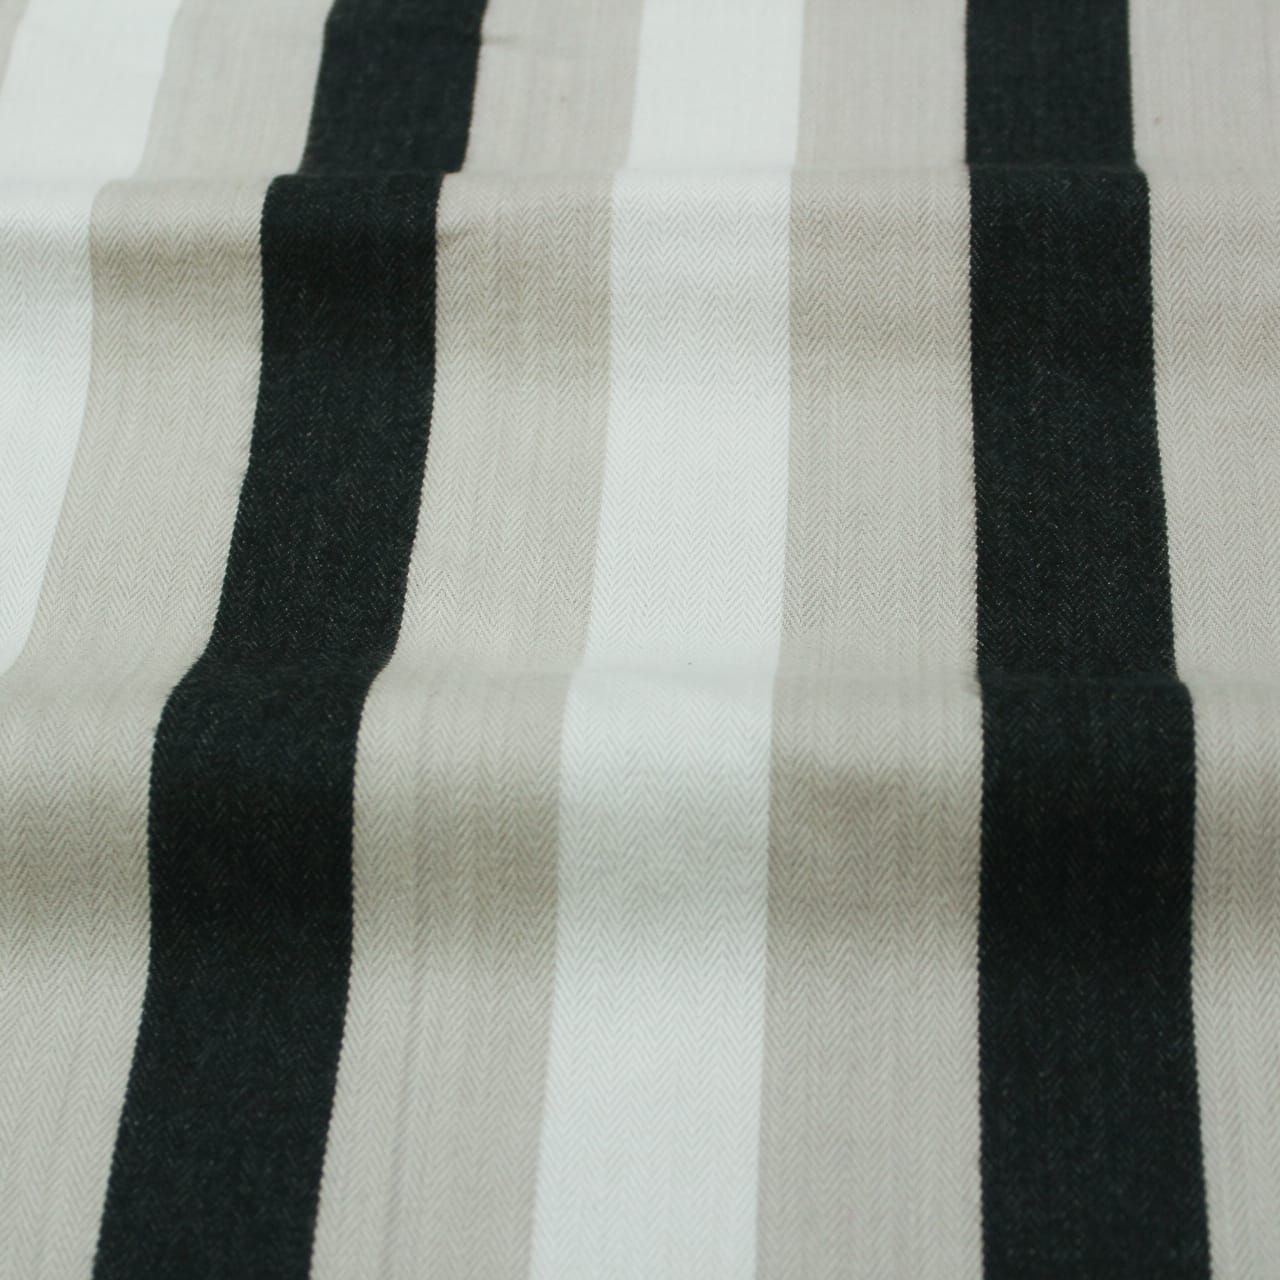 Alpha Sliver Woven Cotton Stripes Table Cover(1 Pc) online in India